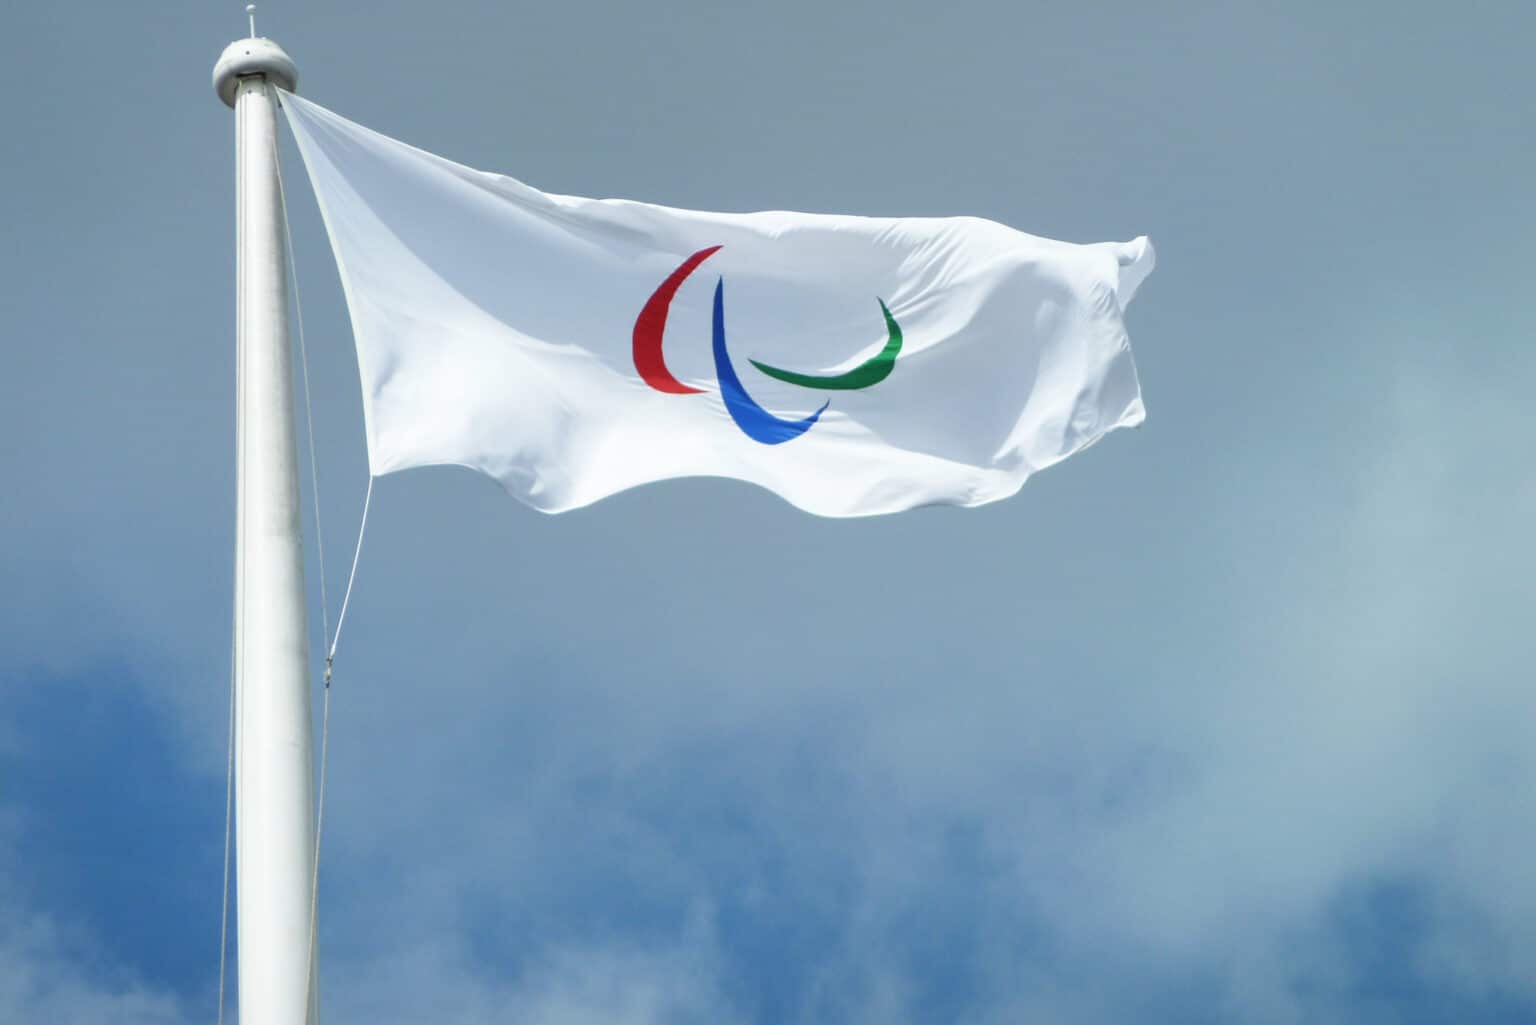 A white flag with red, blue, and green arcs